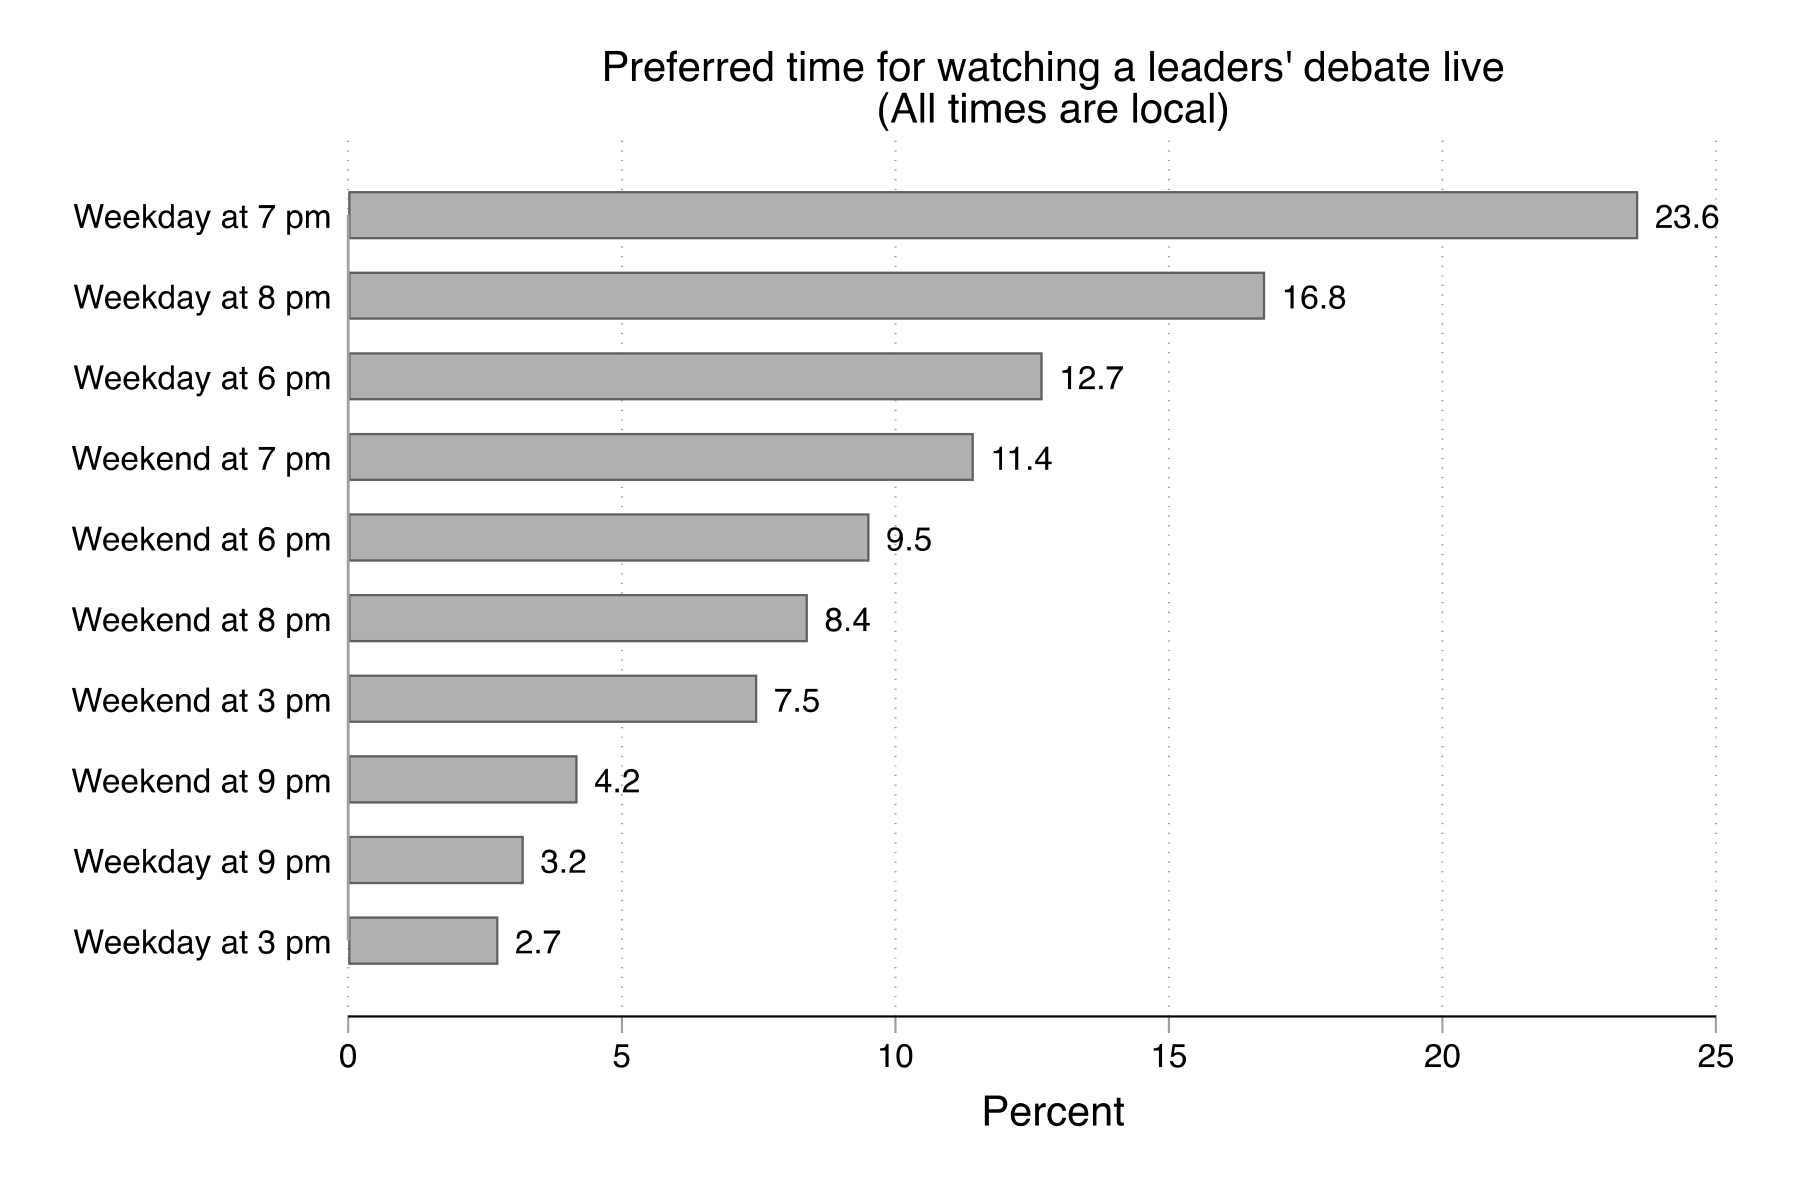 Figure 39. This figure shows participants' preferred time for watching a leaders' debate live. The most popular time to watch is on a weekday at 7 pm (24%). The least popular time to watch is on a weekday at 3 pm (3%).